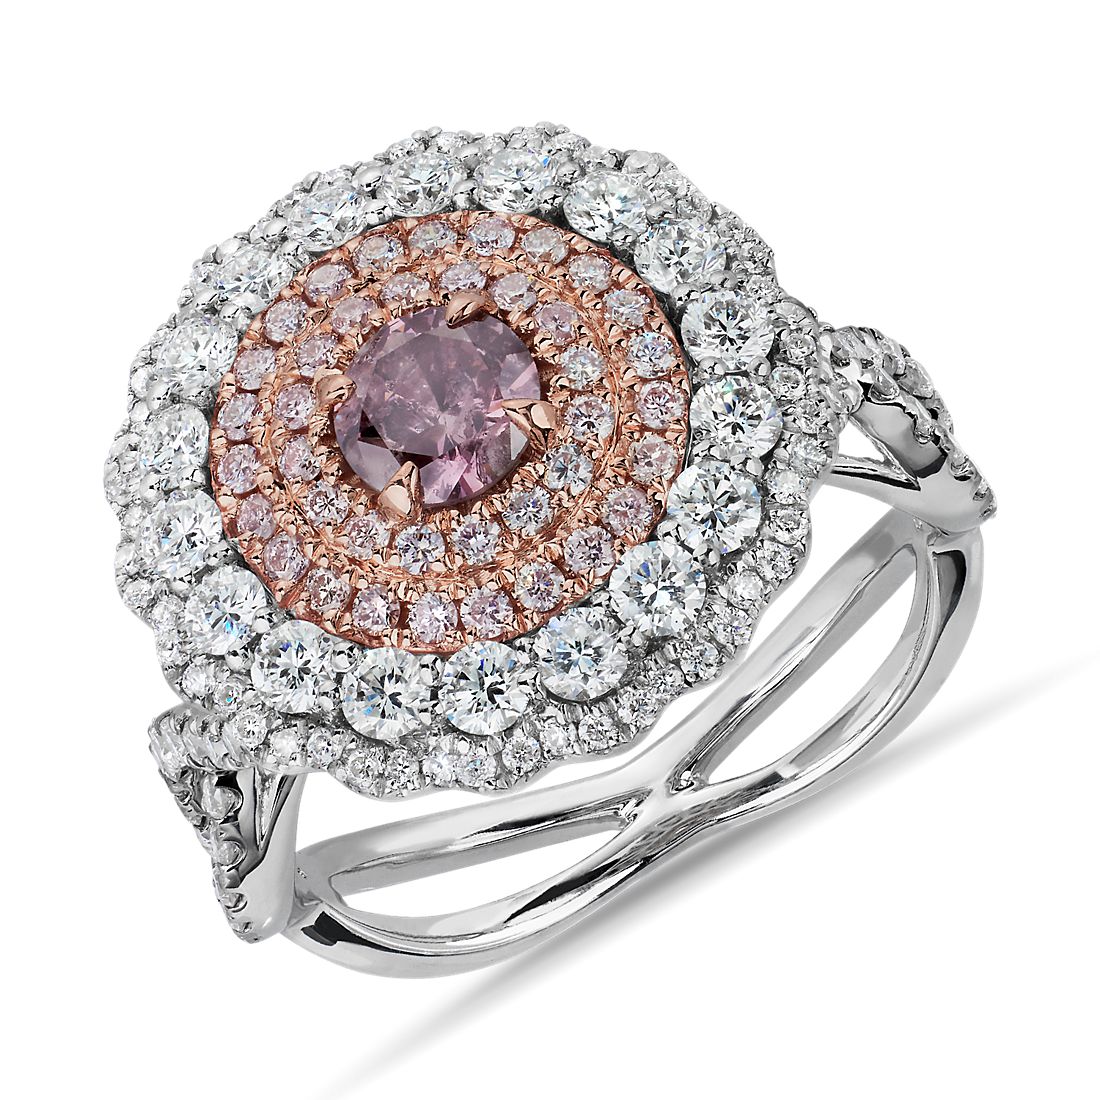 Pink Diamond with Diamond Halos Ring in Platinum and 18k Rose Gold (1.79 ct. tw.)